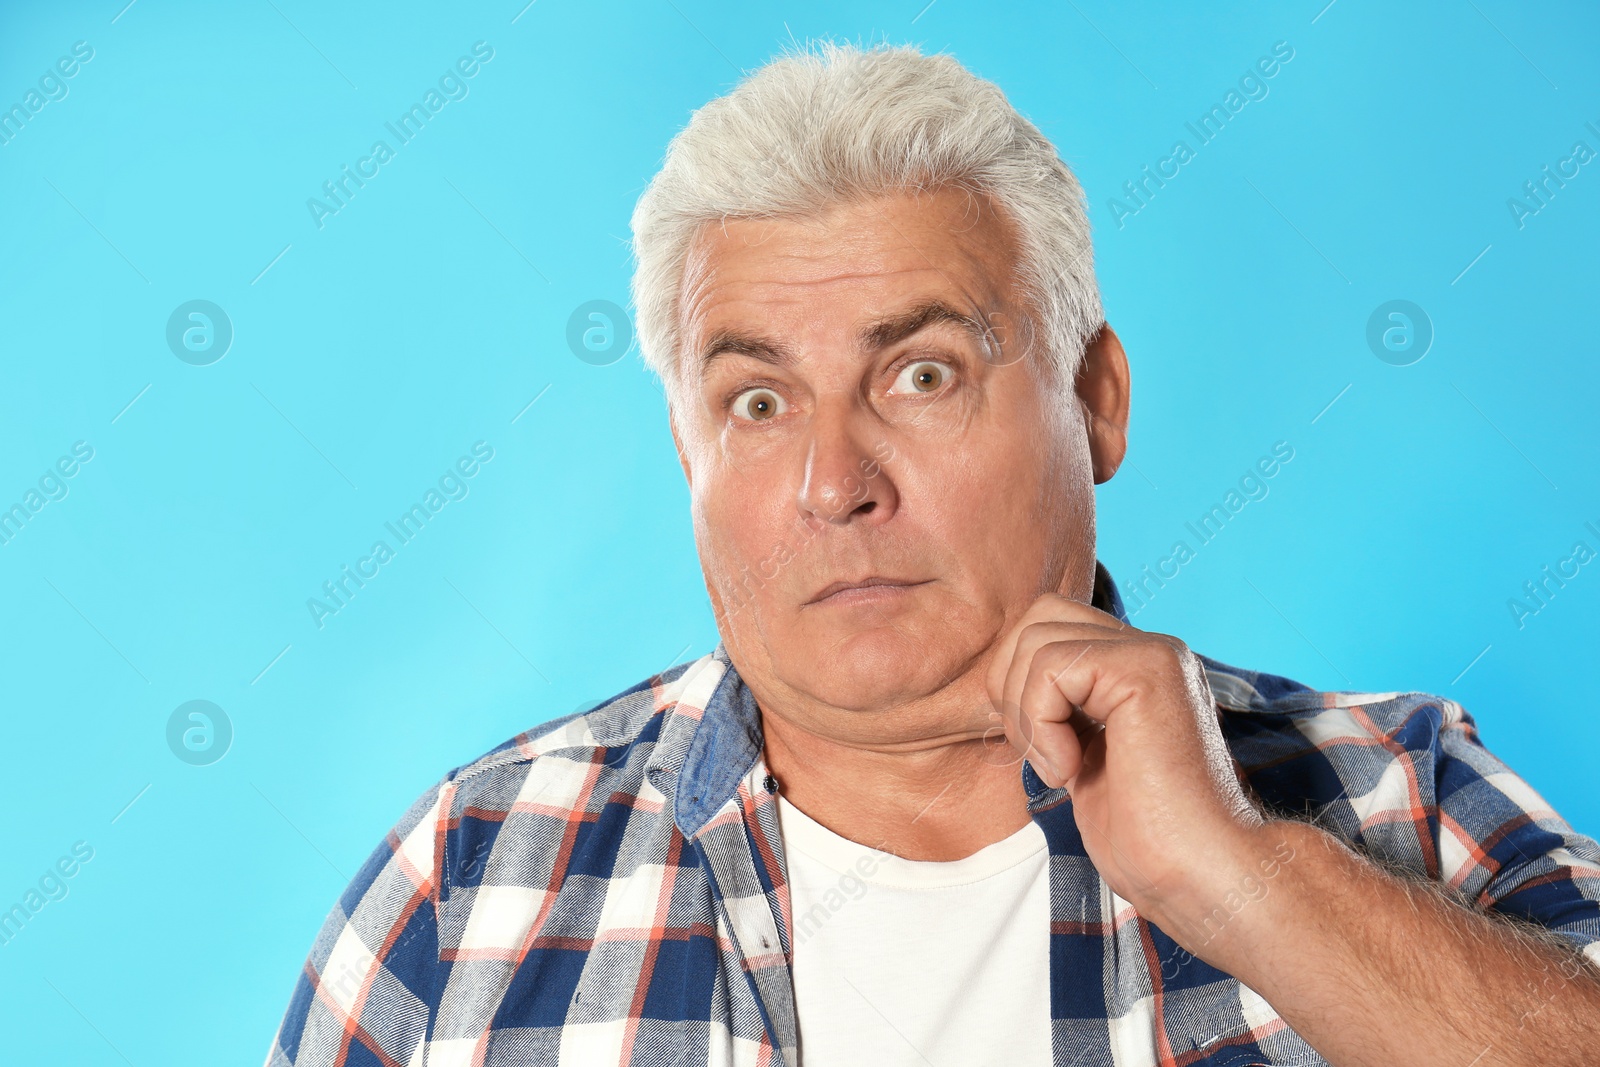 Photo of Emotional mature man with double chin on blue background